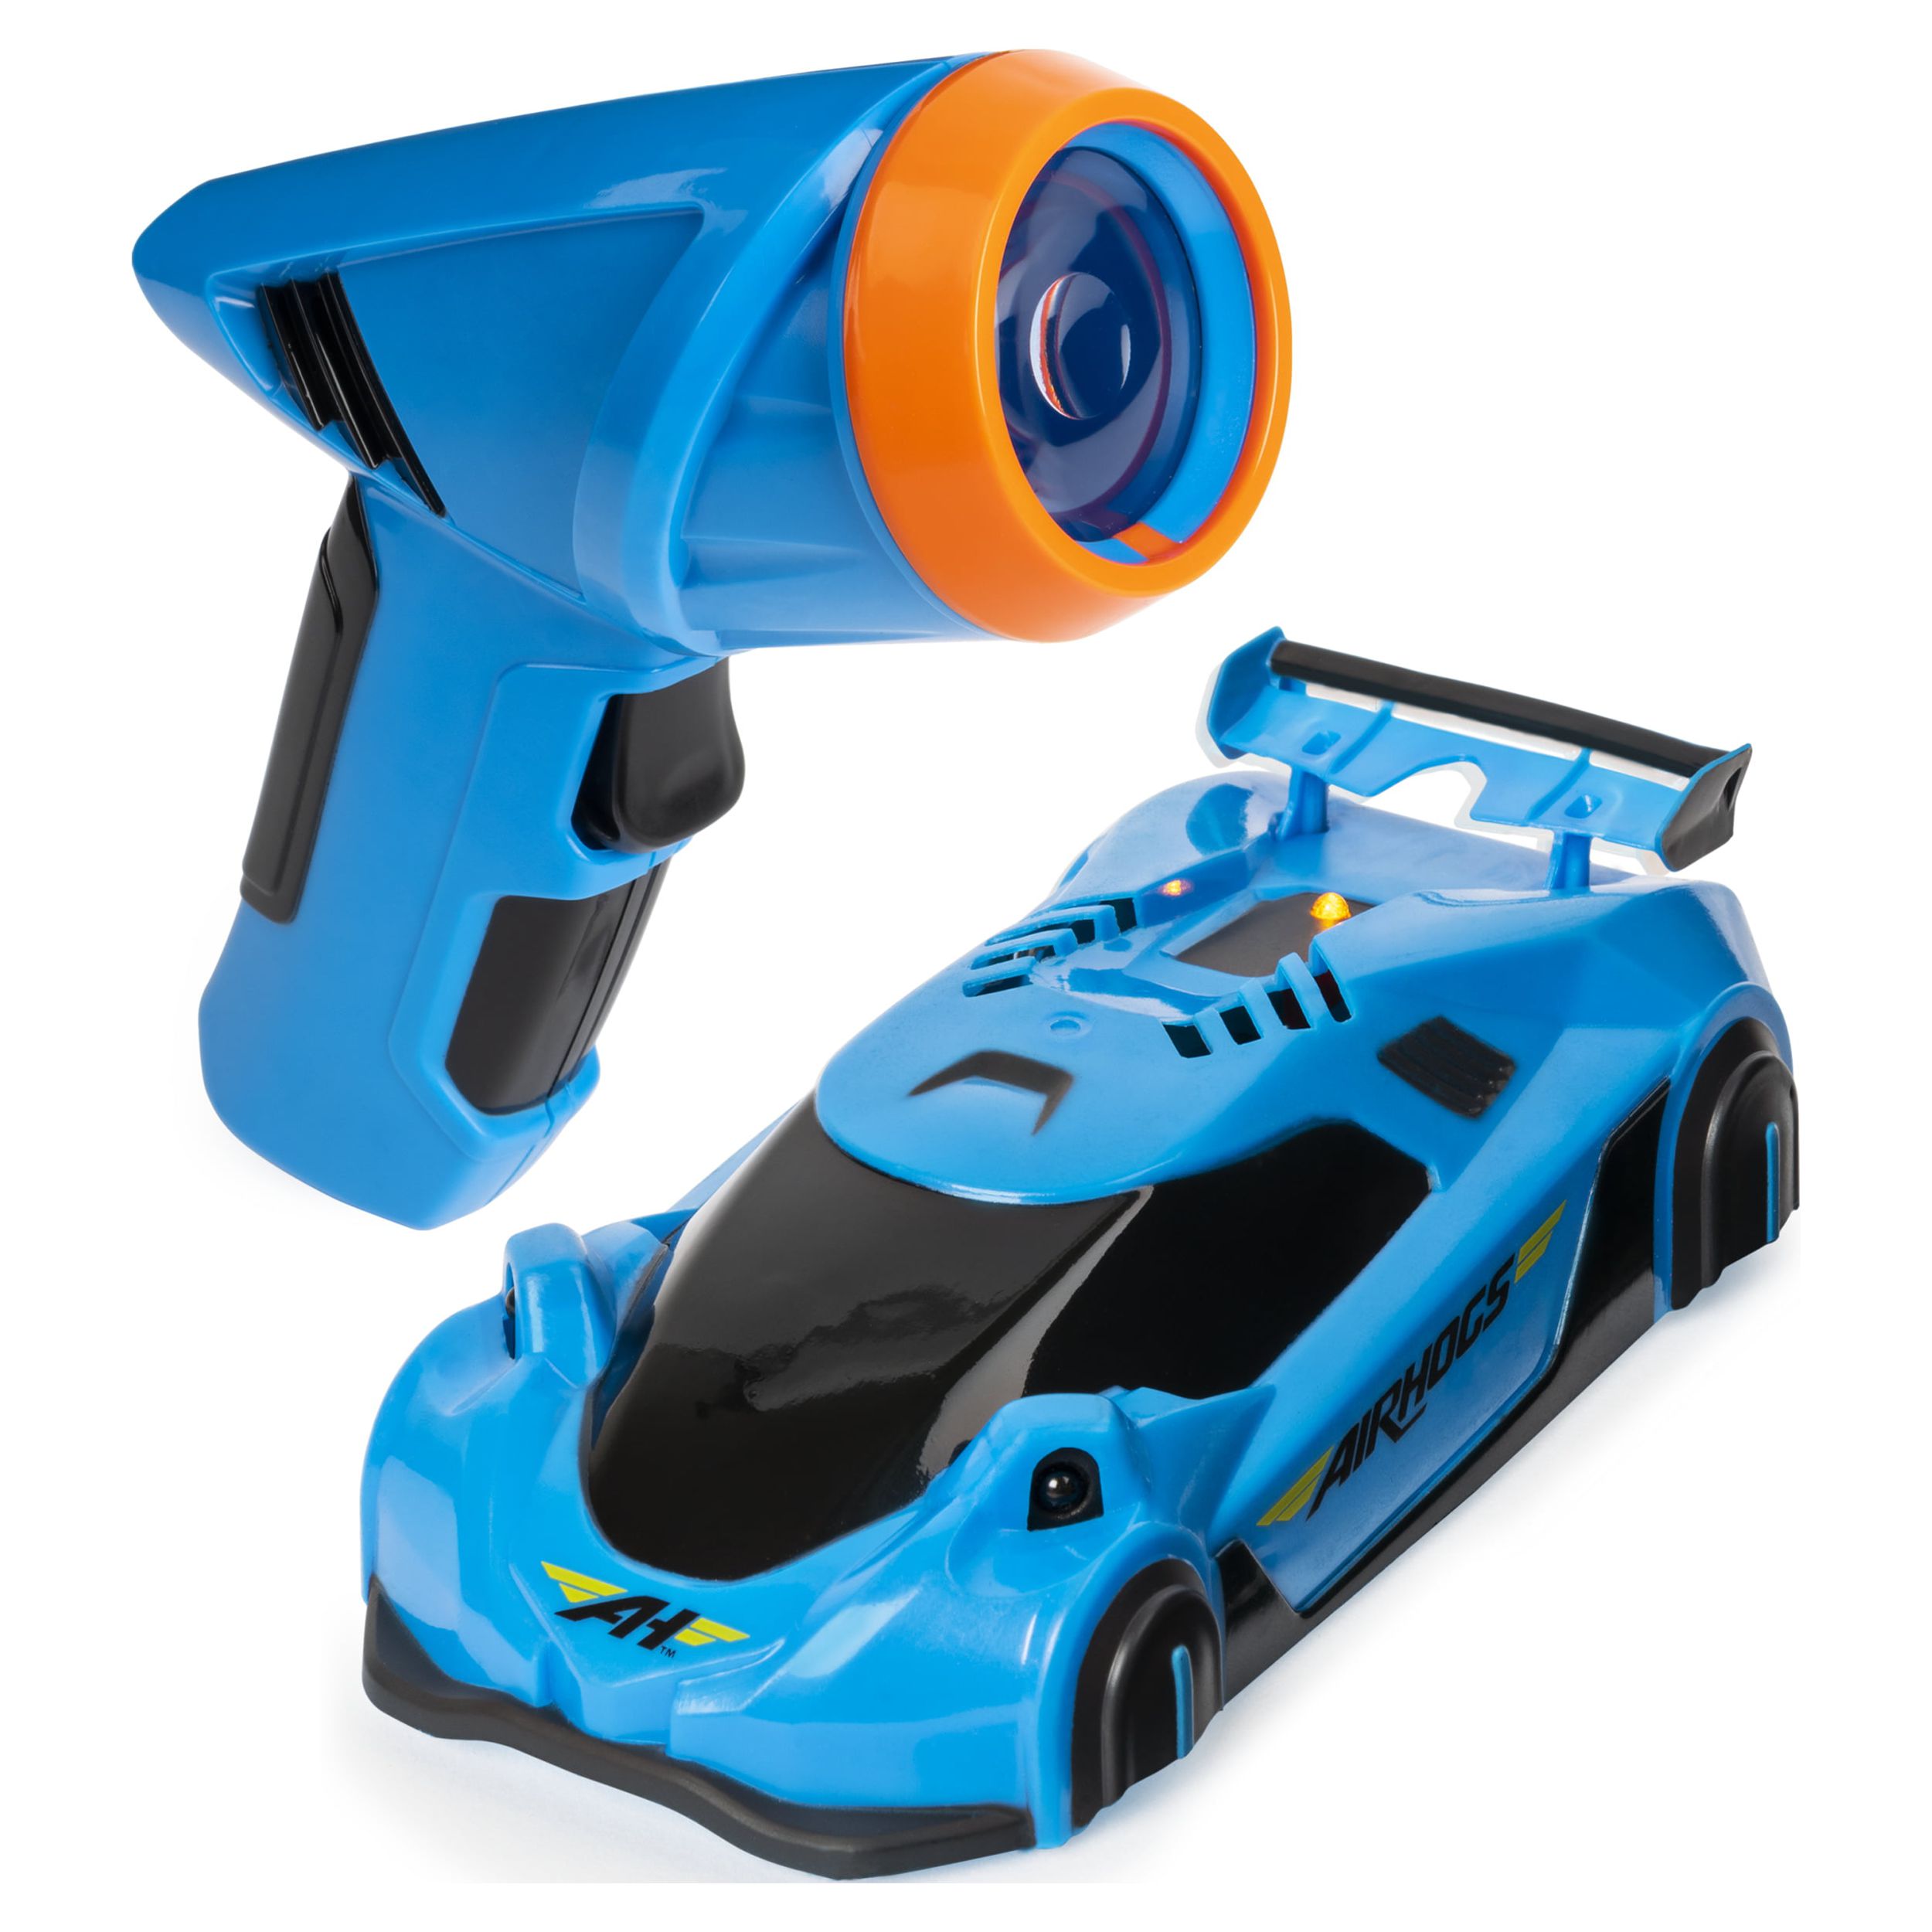 Air Hogs, Zero Gravity Laser, Laser-Guided Real Wall Climbing Race Car (Colors May Vary) - image 2 of 8